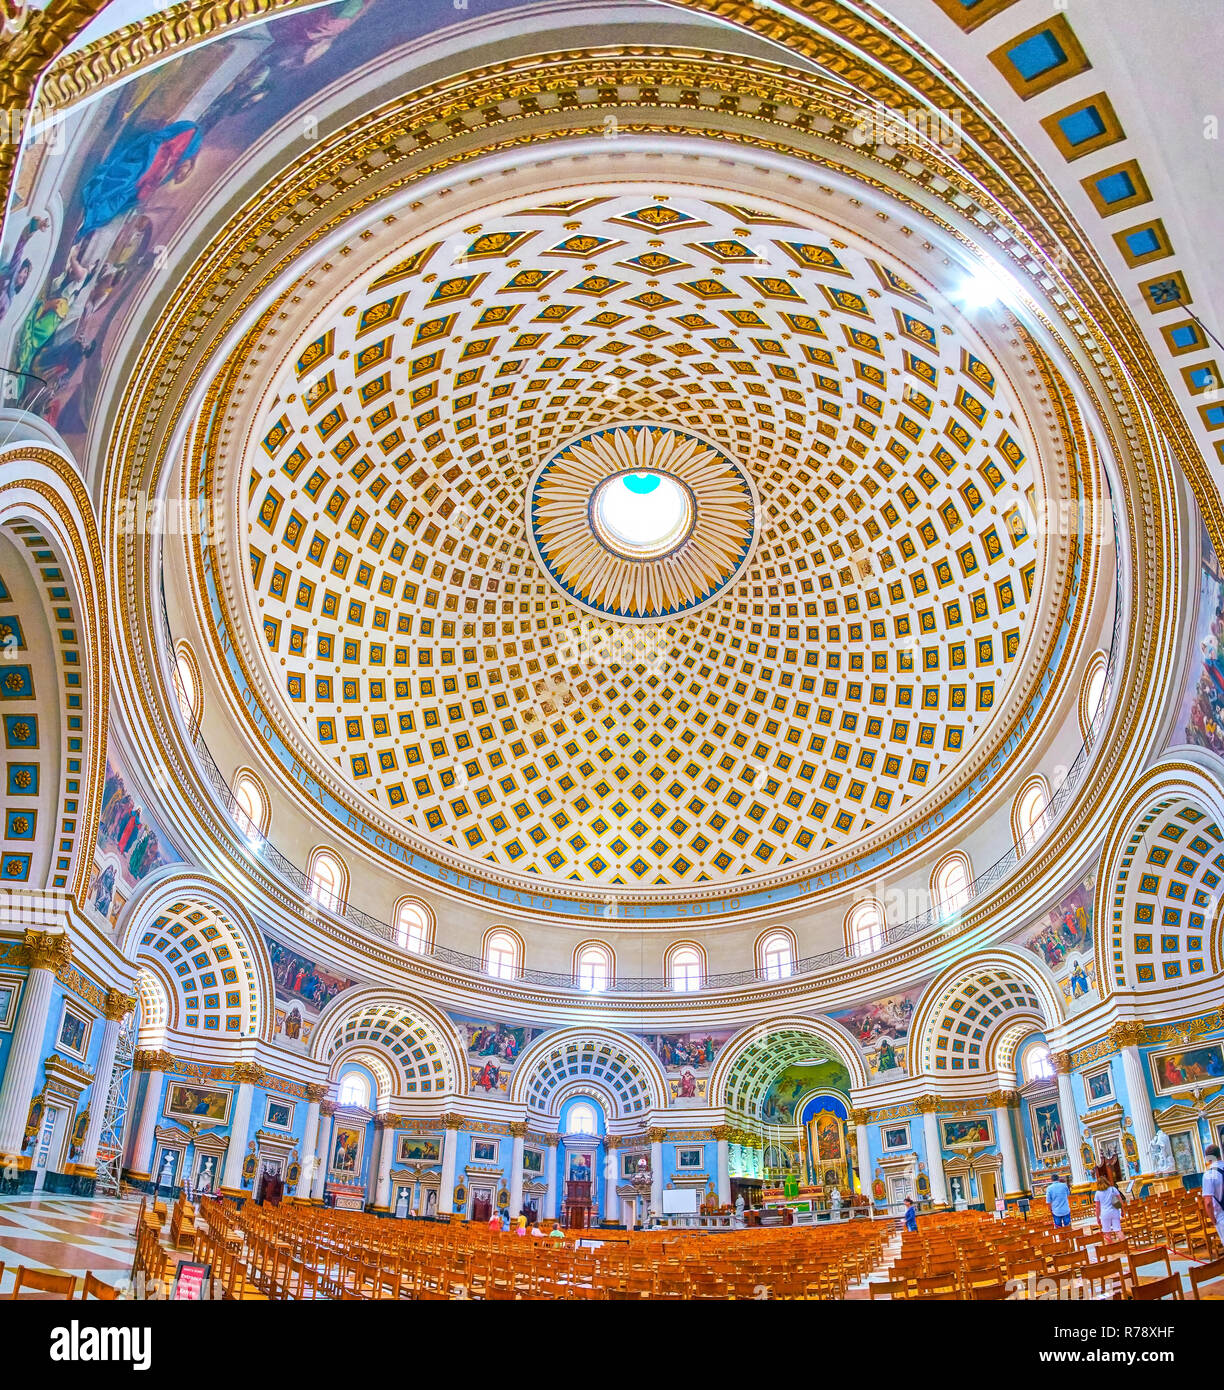 MOSTA, MALTA - JUNE 14, 2018: Interior of huge Basilica of the Assumption of Our Lady (Rotunda) with richly decorated arched niches, beautiful altar a Stock Photo